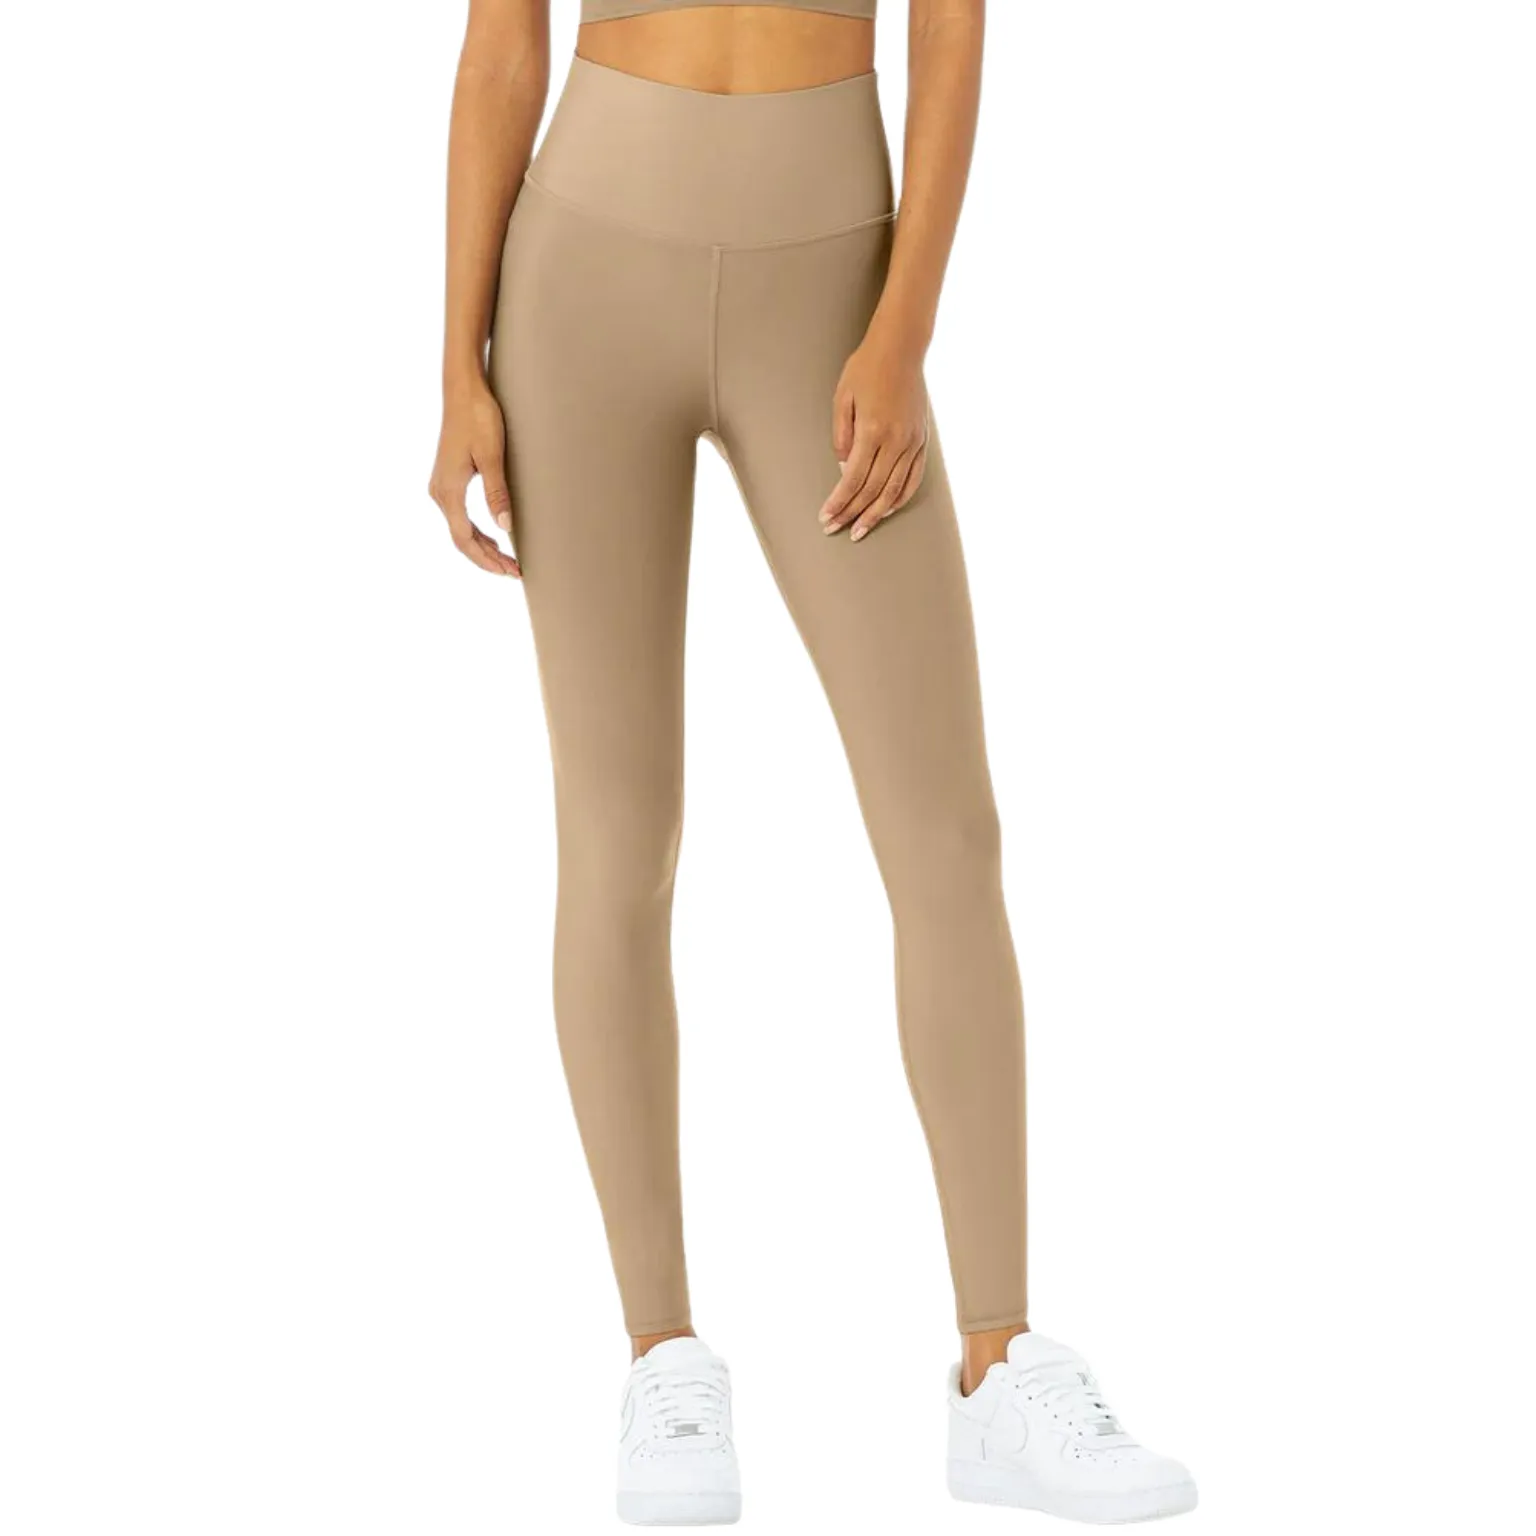 Nude Color Leggings manufacturing with trendy design